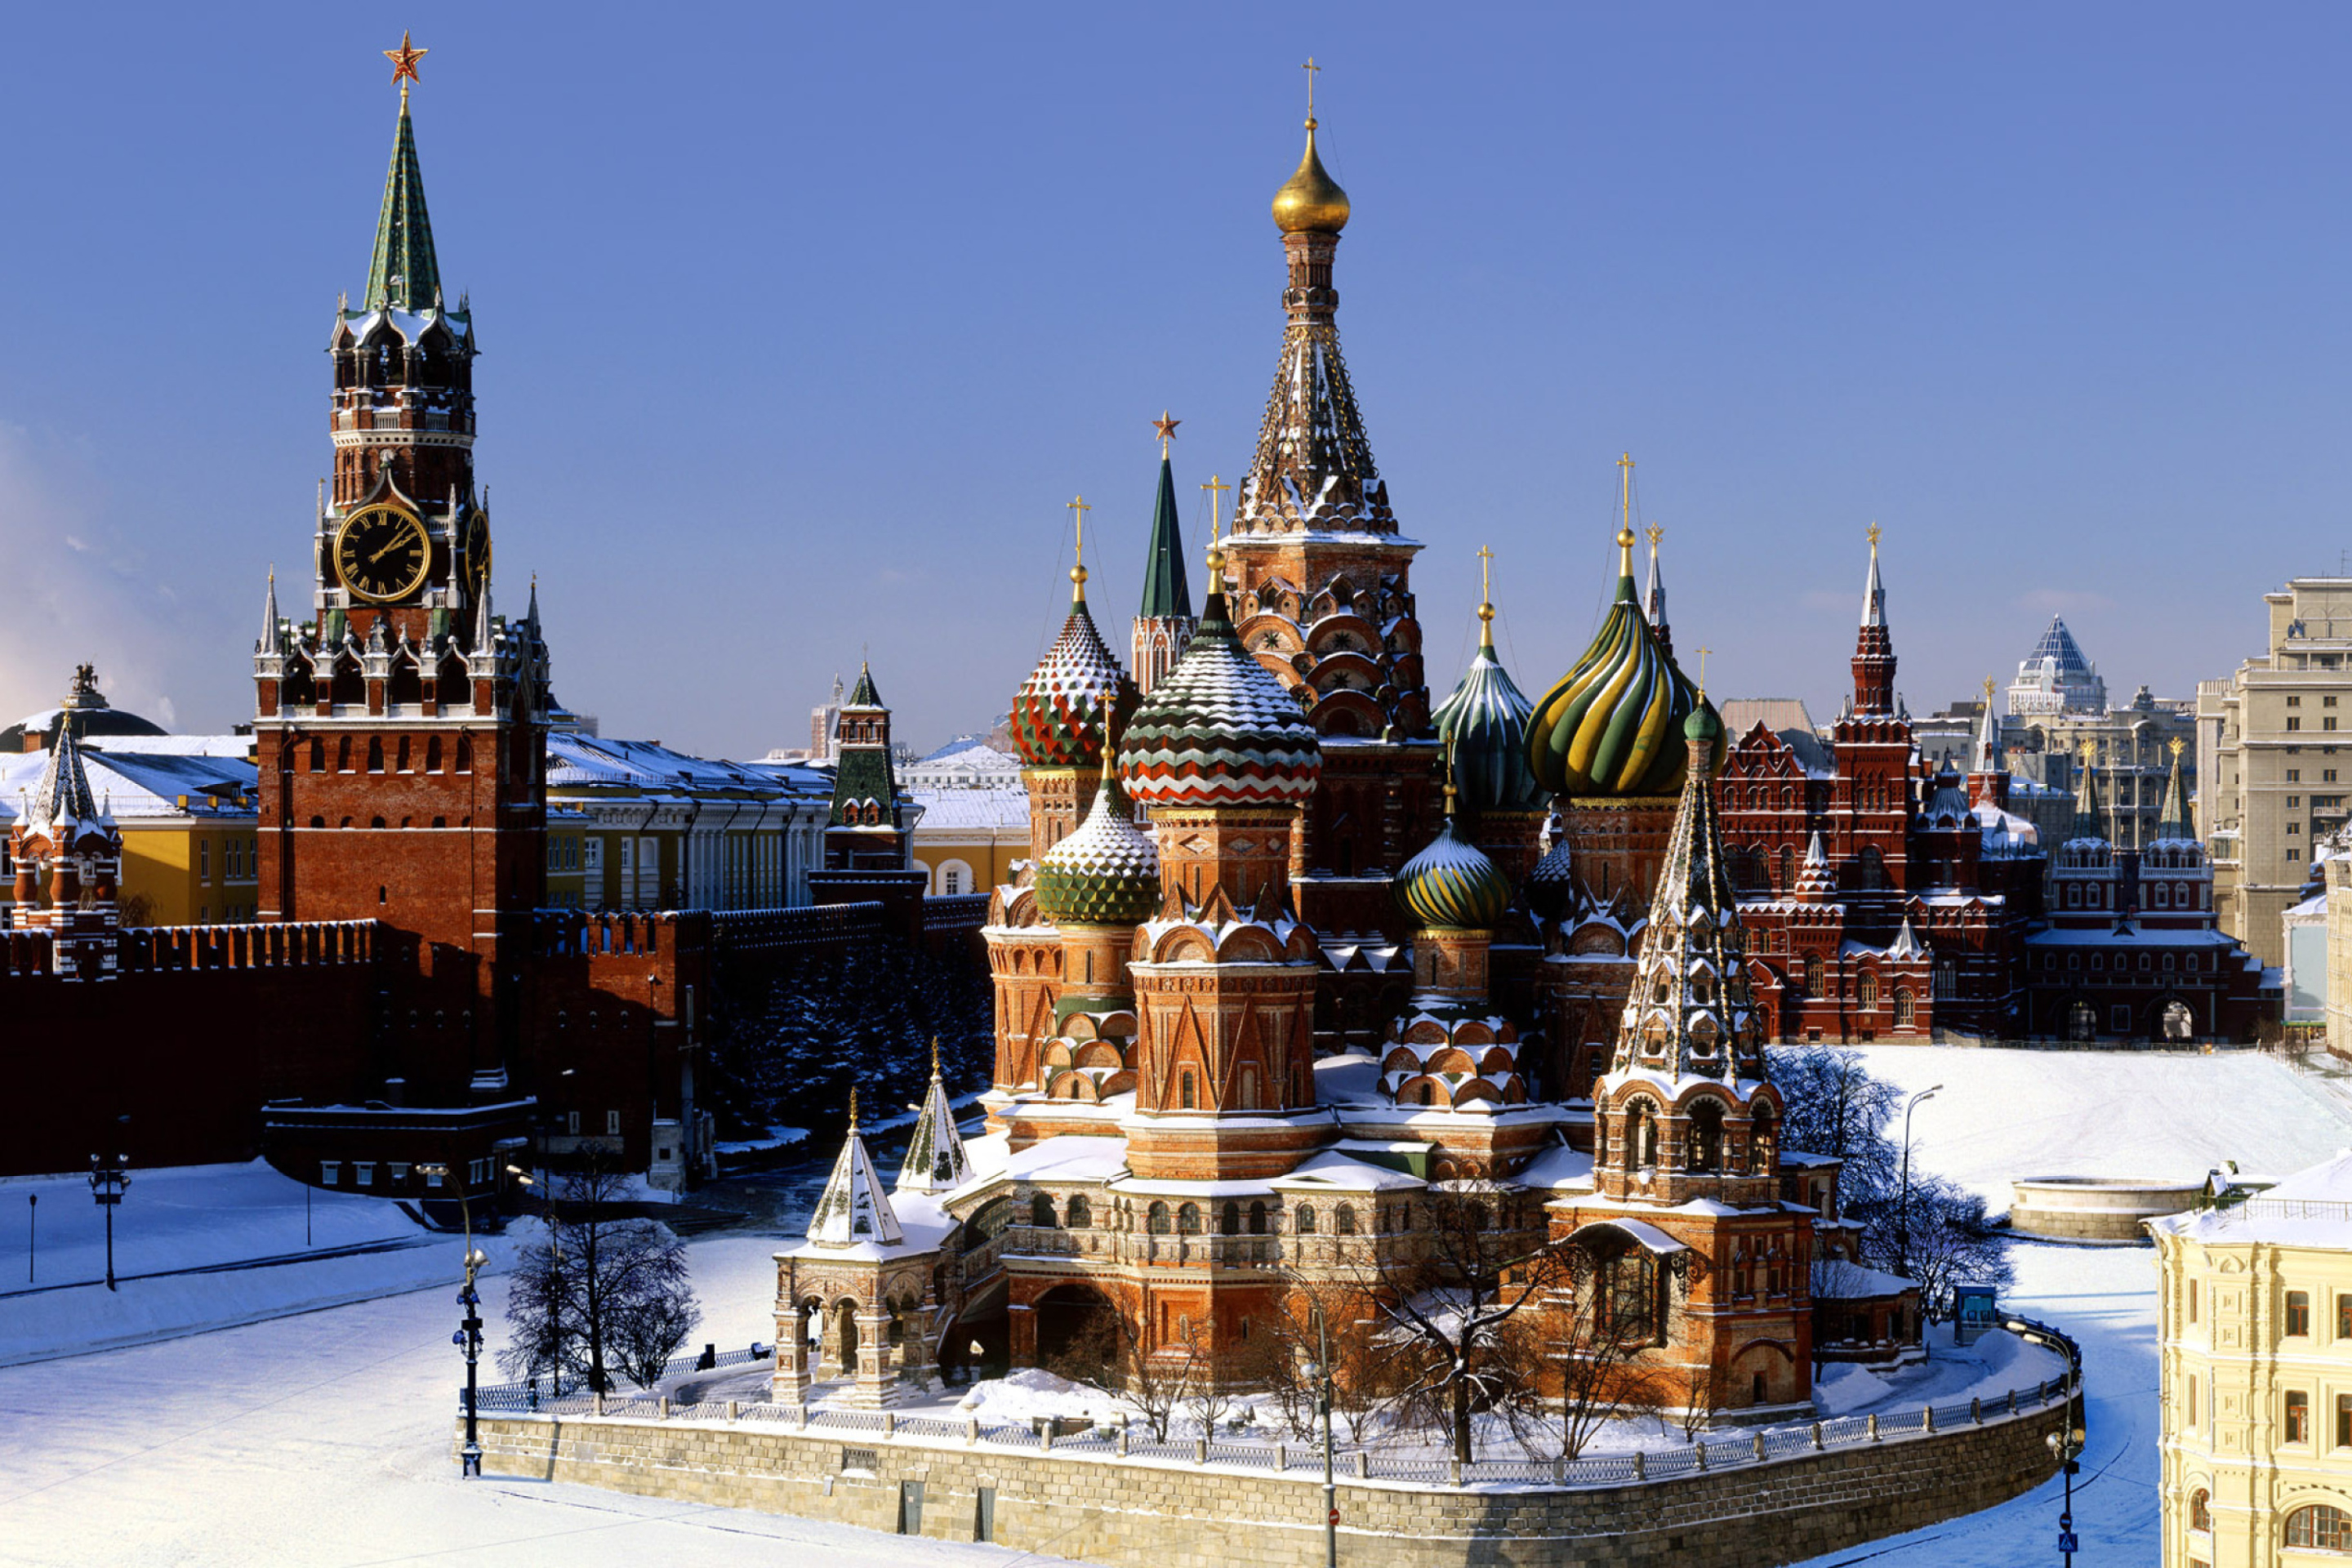 Moscow - Red Square wallpaper 2880x1920